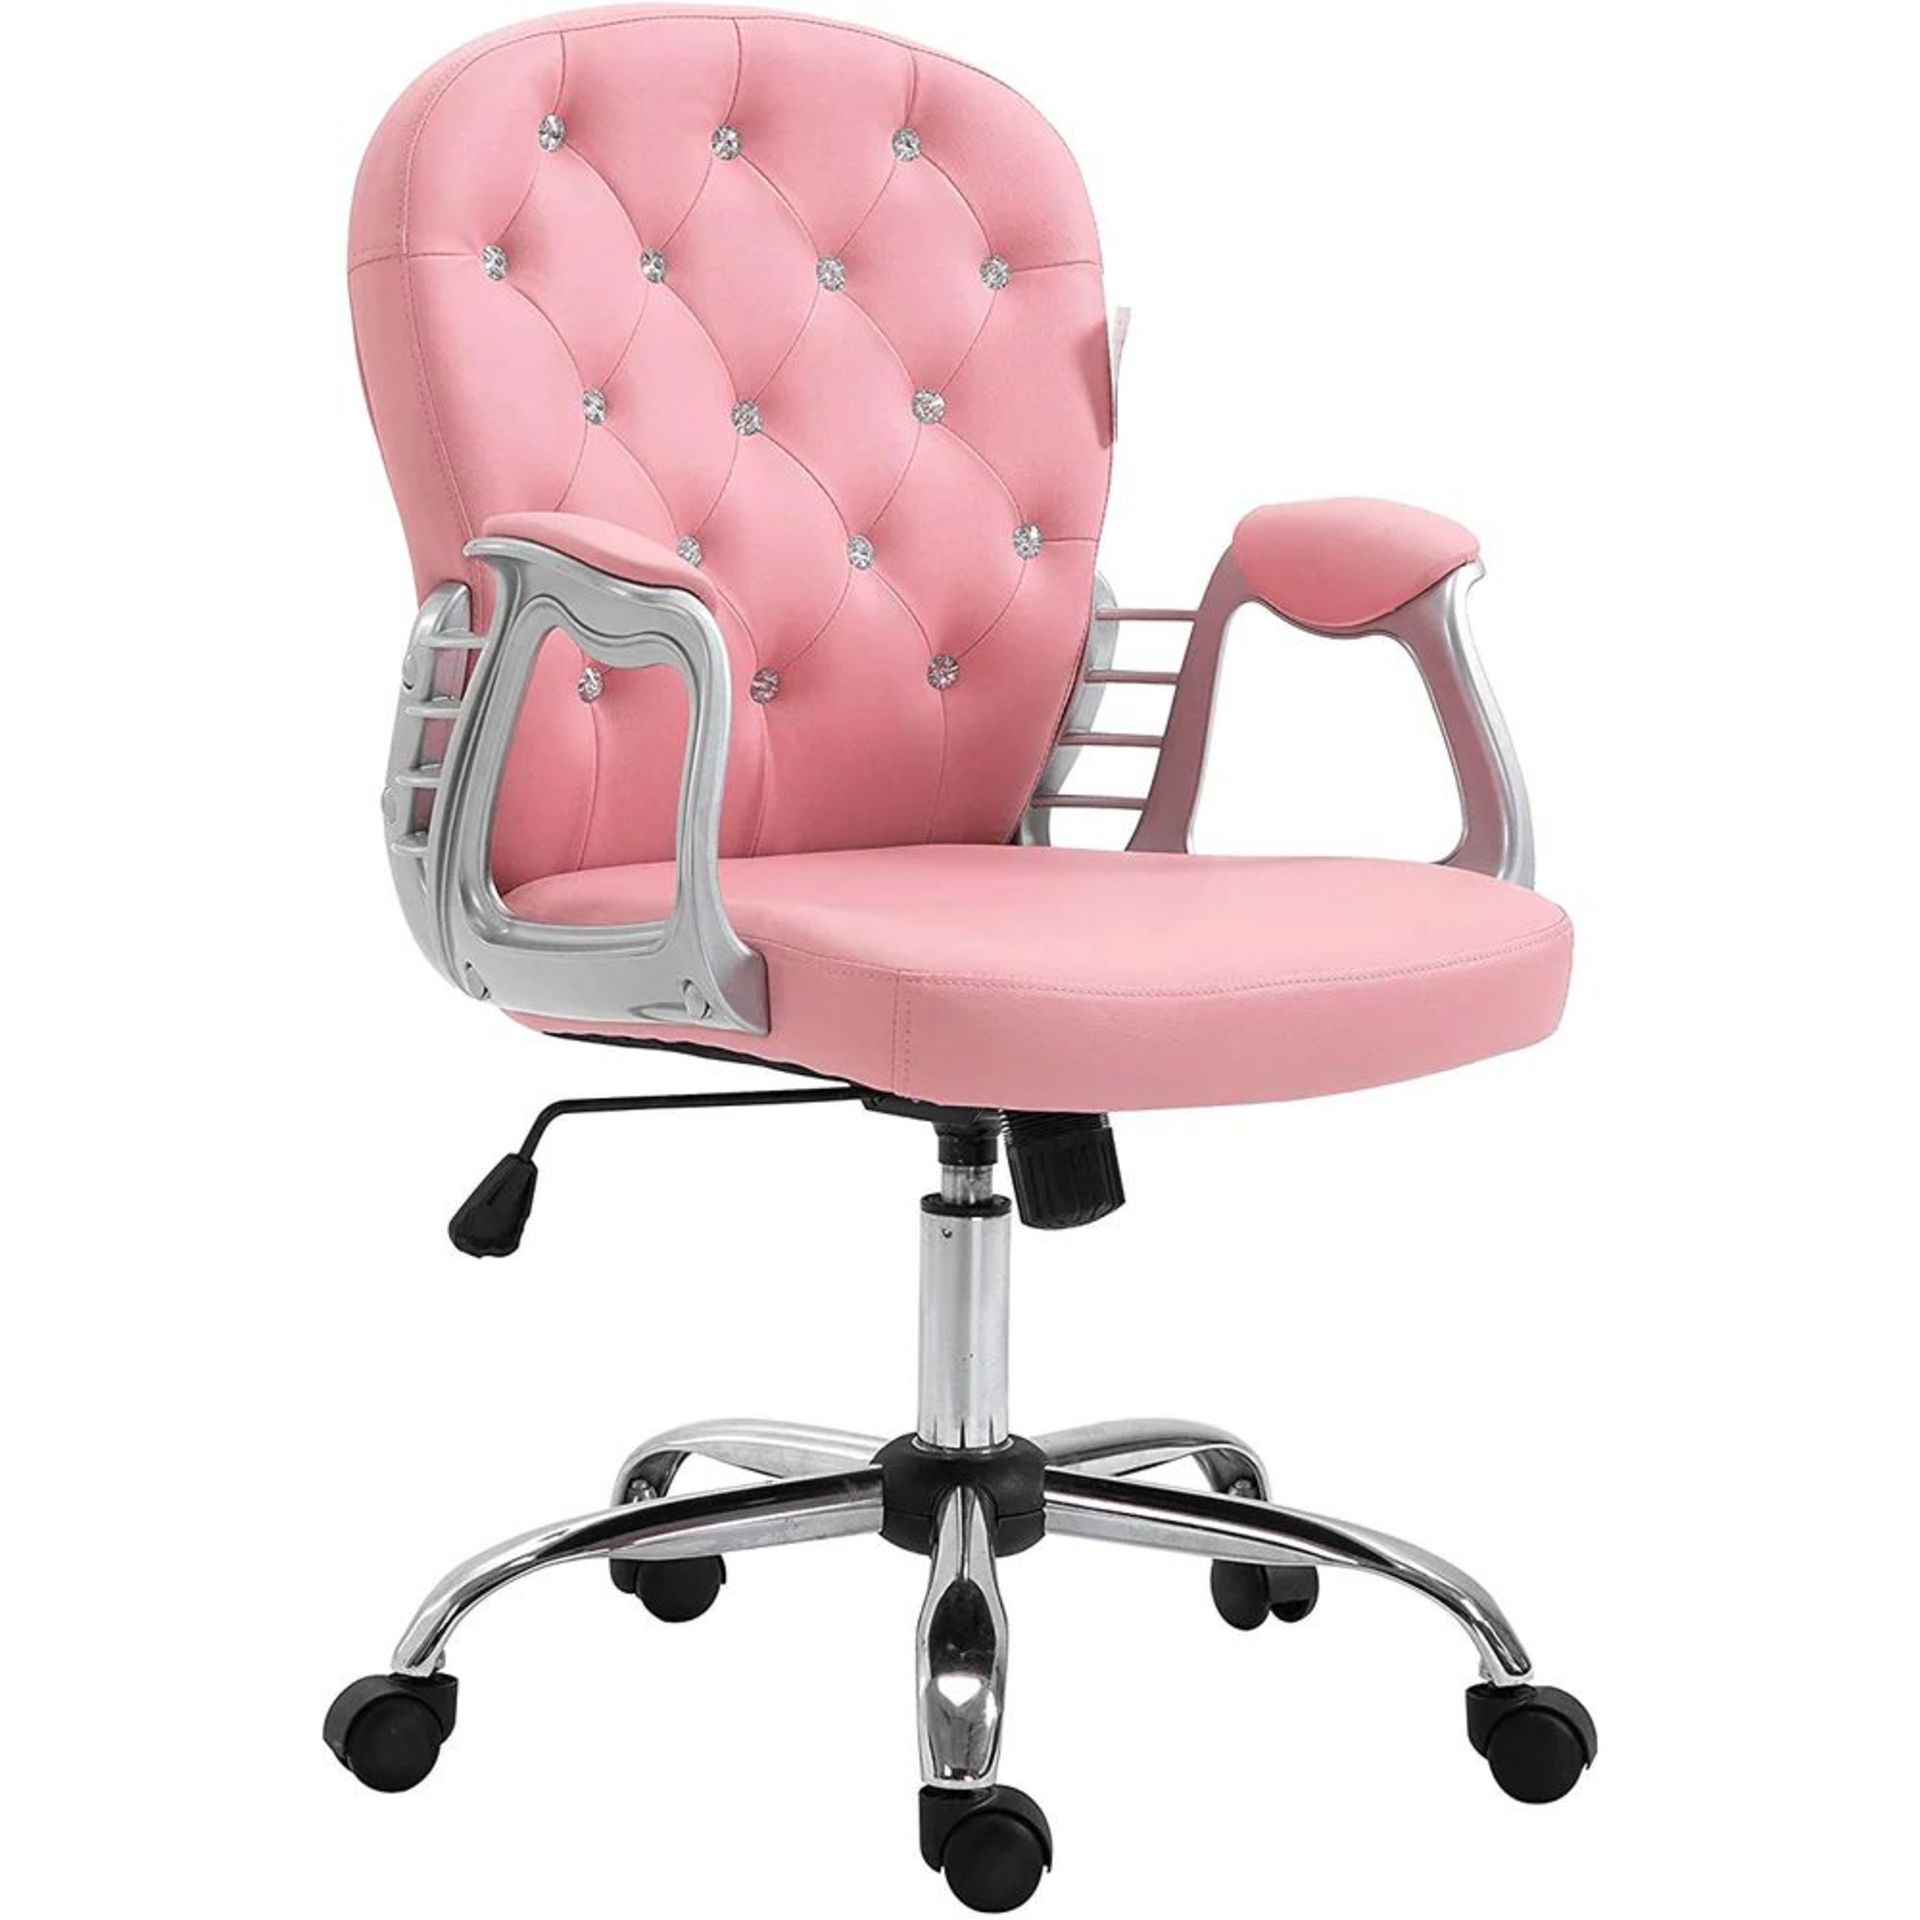 Pink Faux Leather Chesterfield Swivel Chair. - SR24. RRP £199.99. The chair is comfortably padded in